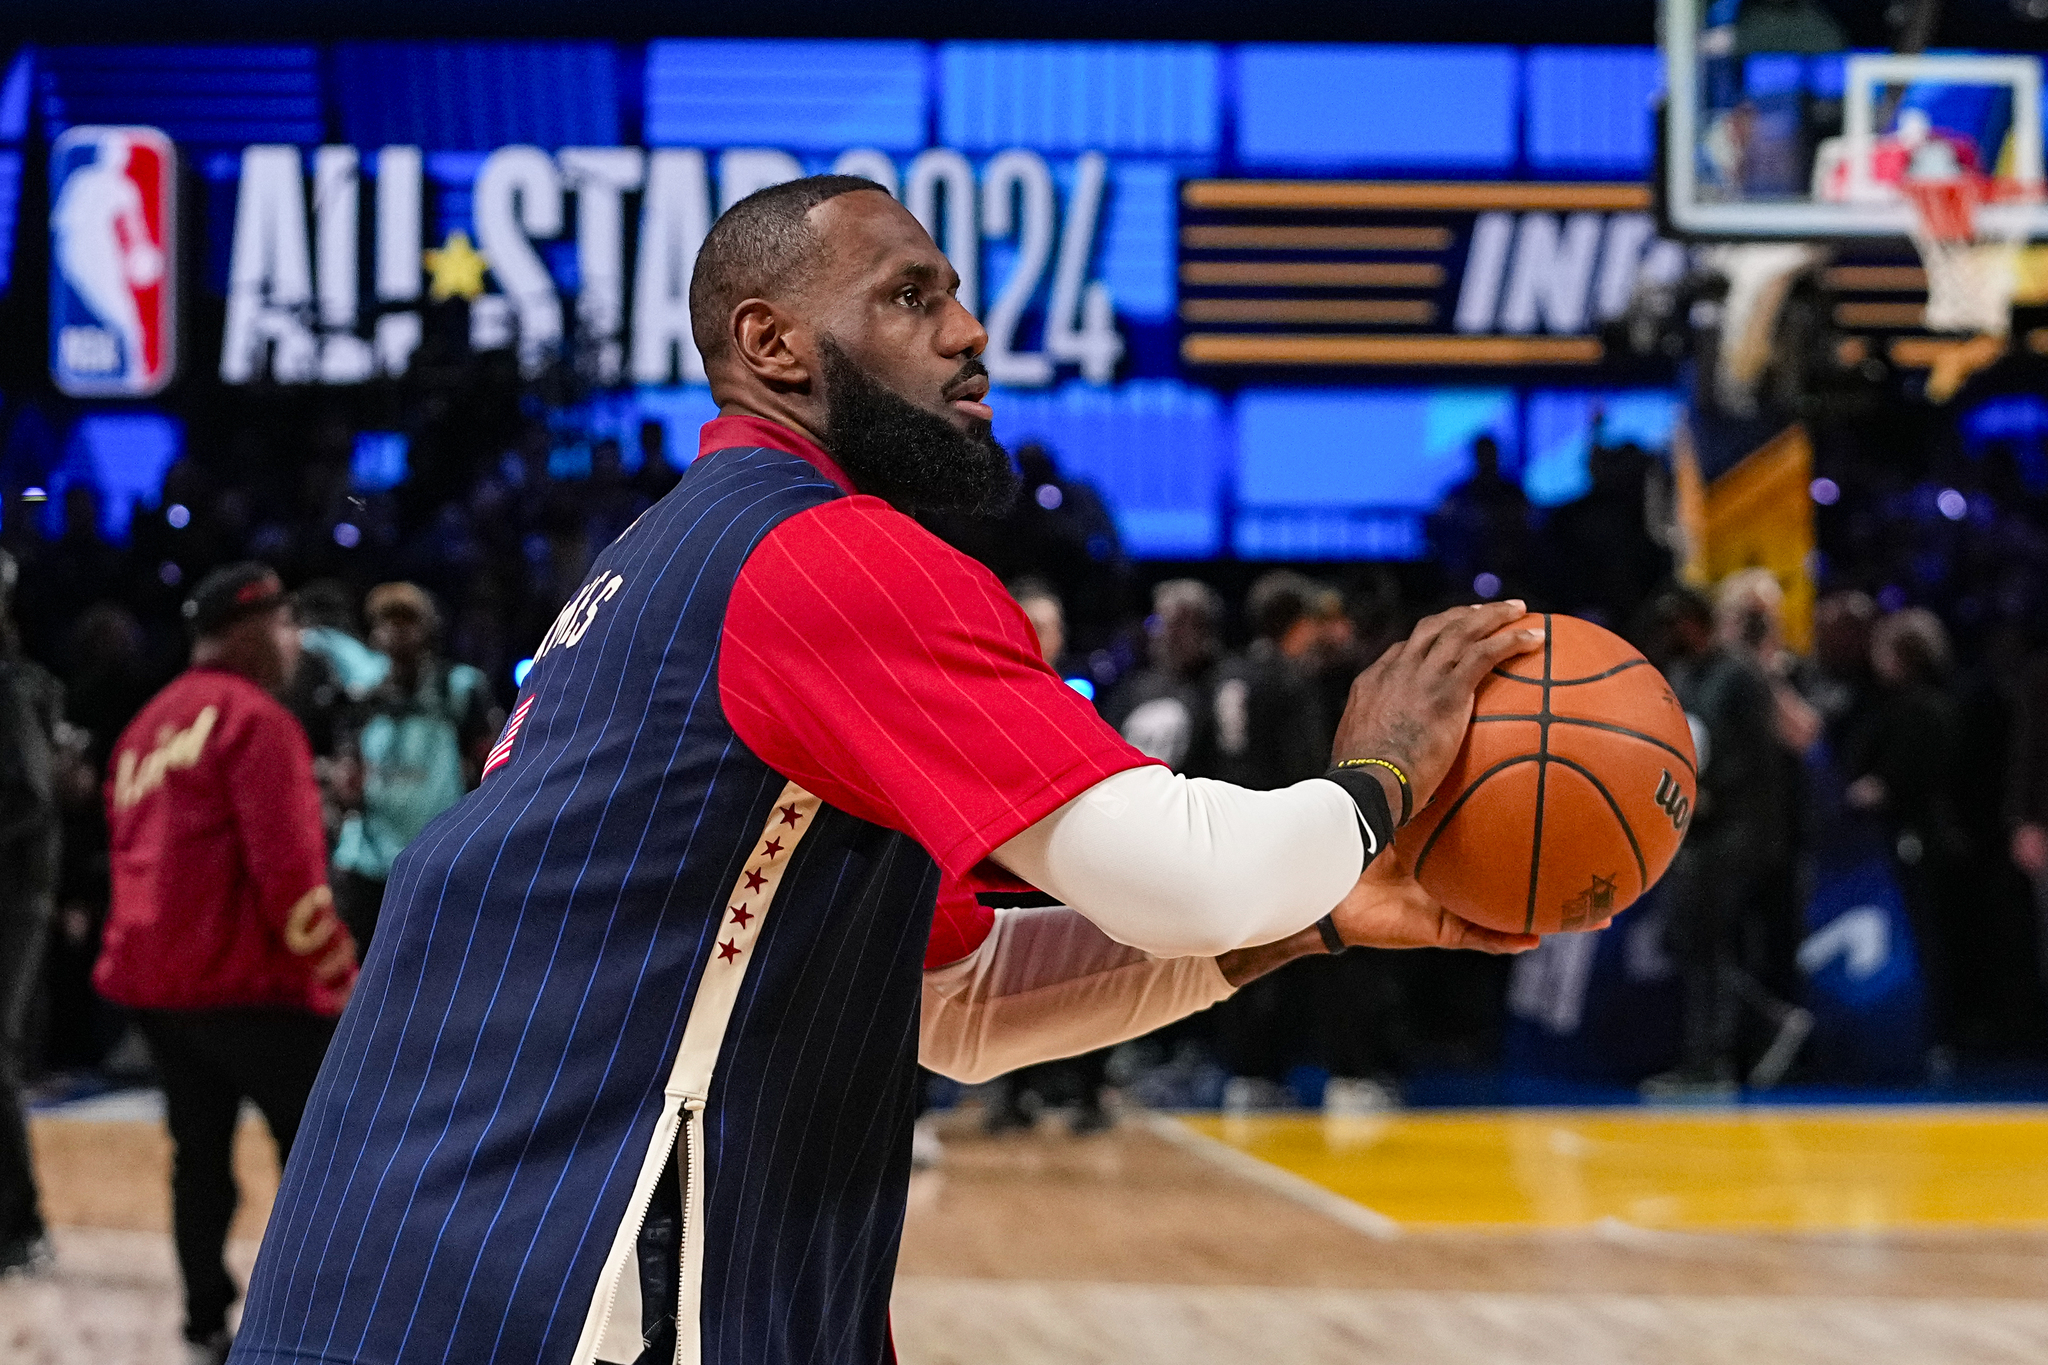 Los Angeles Lakers forward LeBron James warms up before the start of the NBA All-Star game